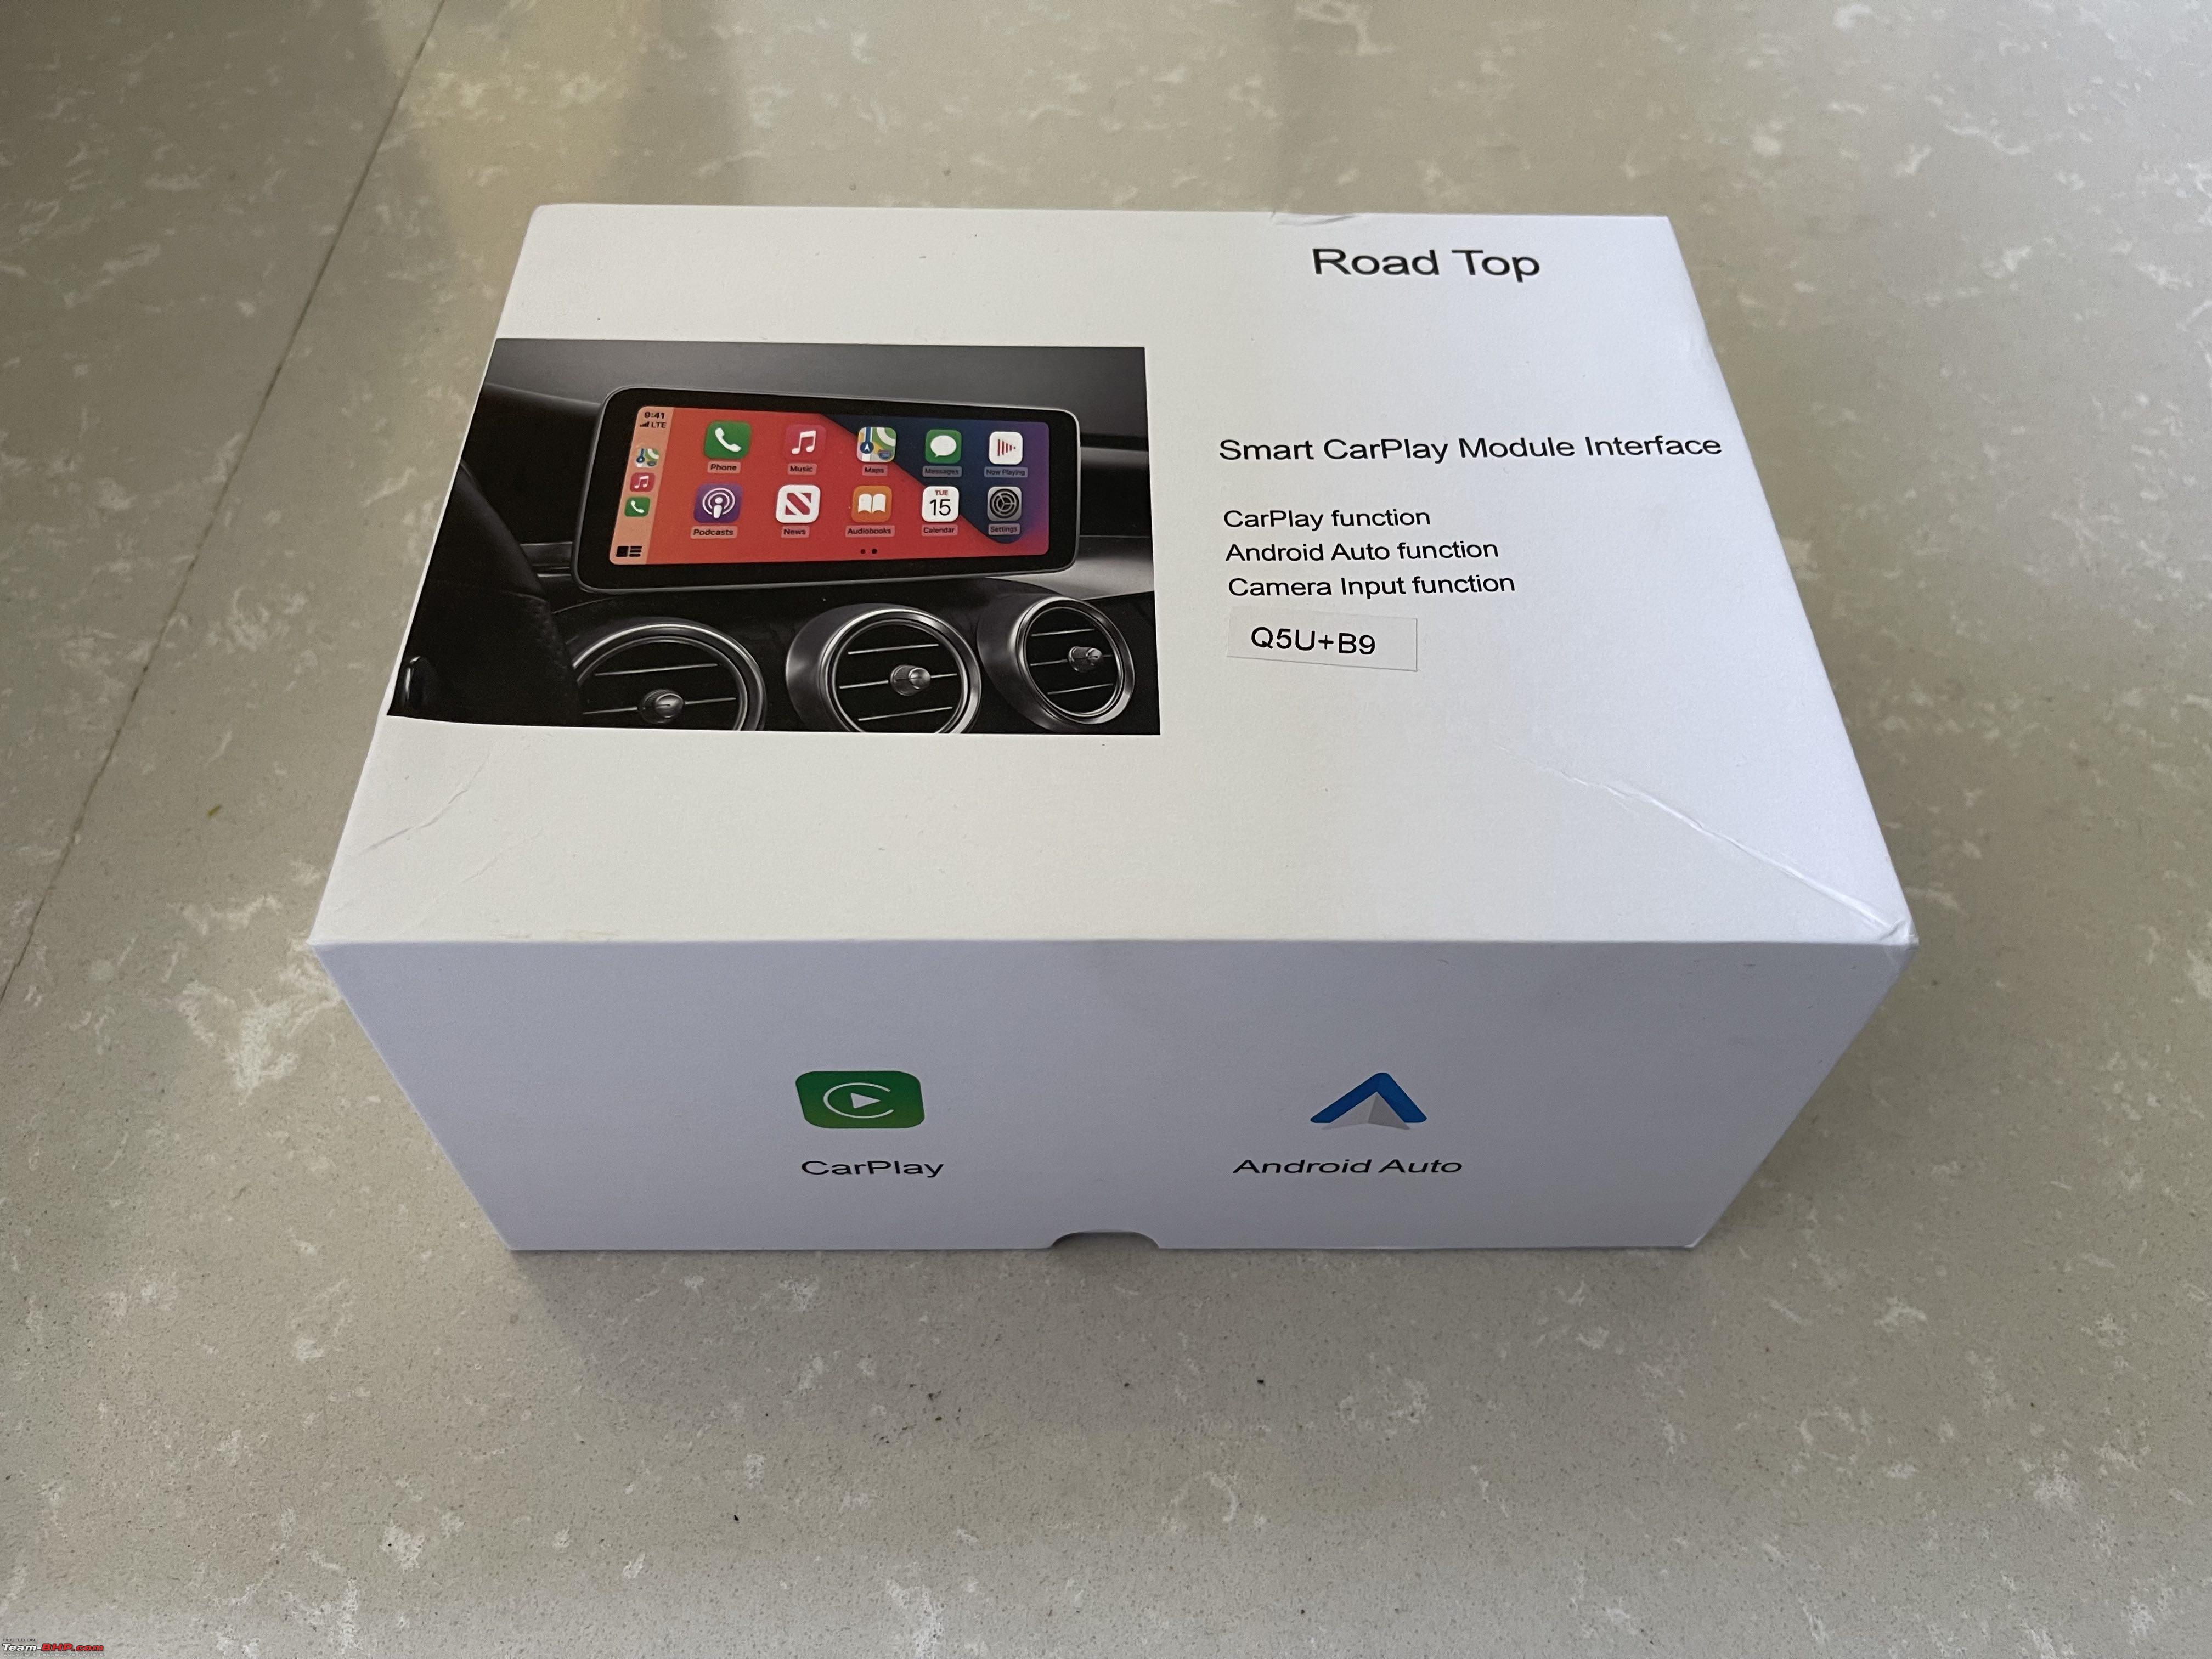 AUDI A3 WIRELESS APPLE CARPLAY WIRED ANDROID AUTO MMI BOXES